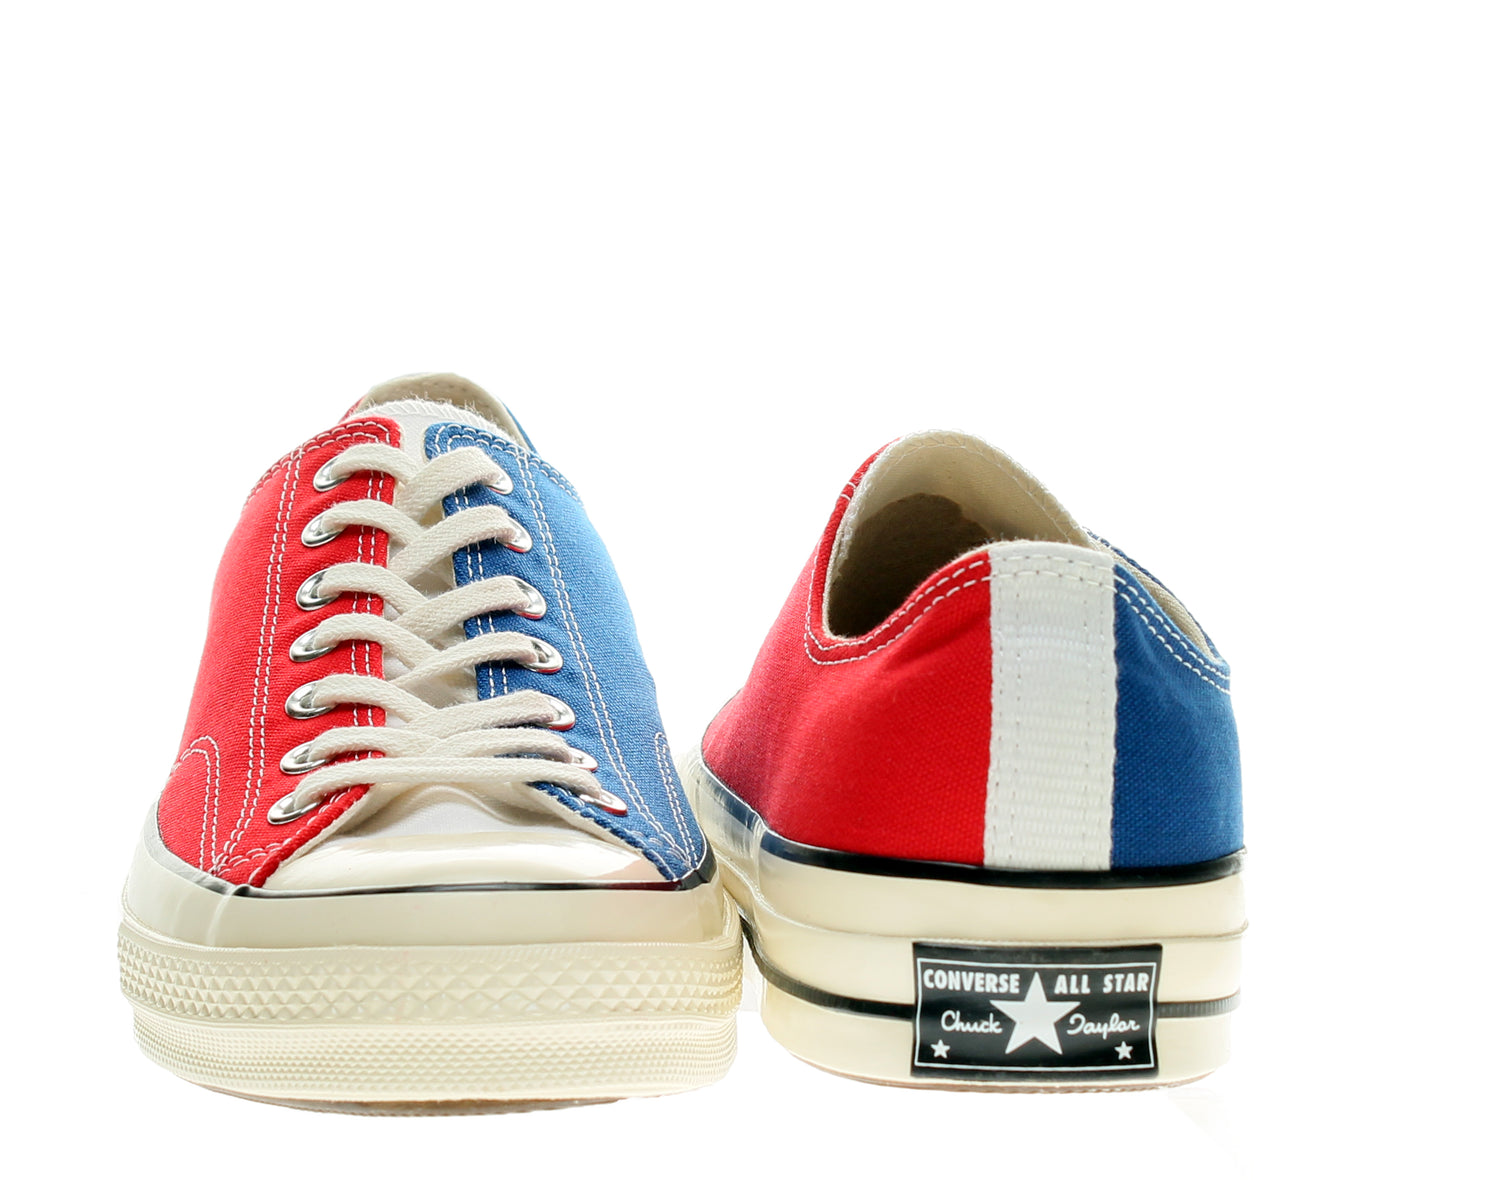 Converse Chuck Taylor All Star 3 Panel OX 1970 Low Top Sneakers